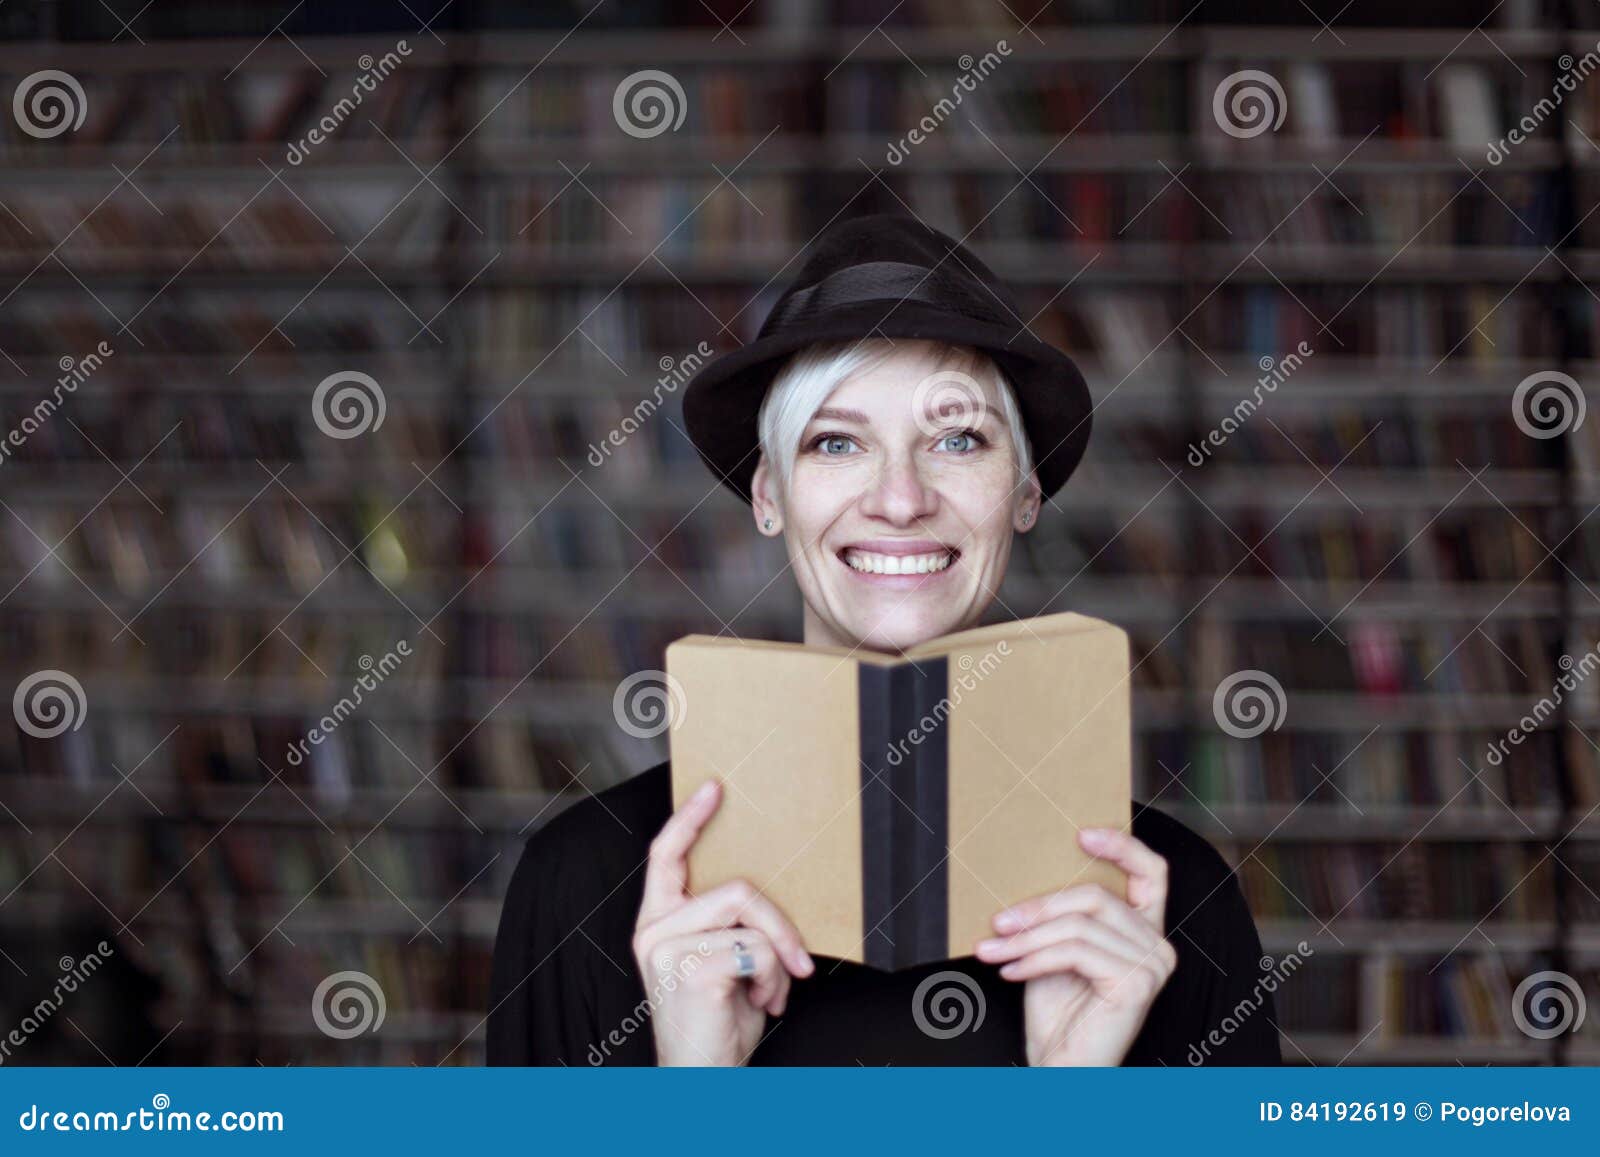 Blonde woman writing in library - wide 9